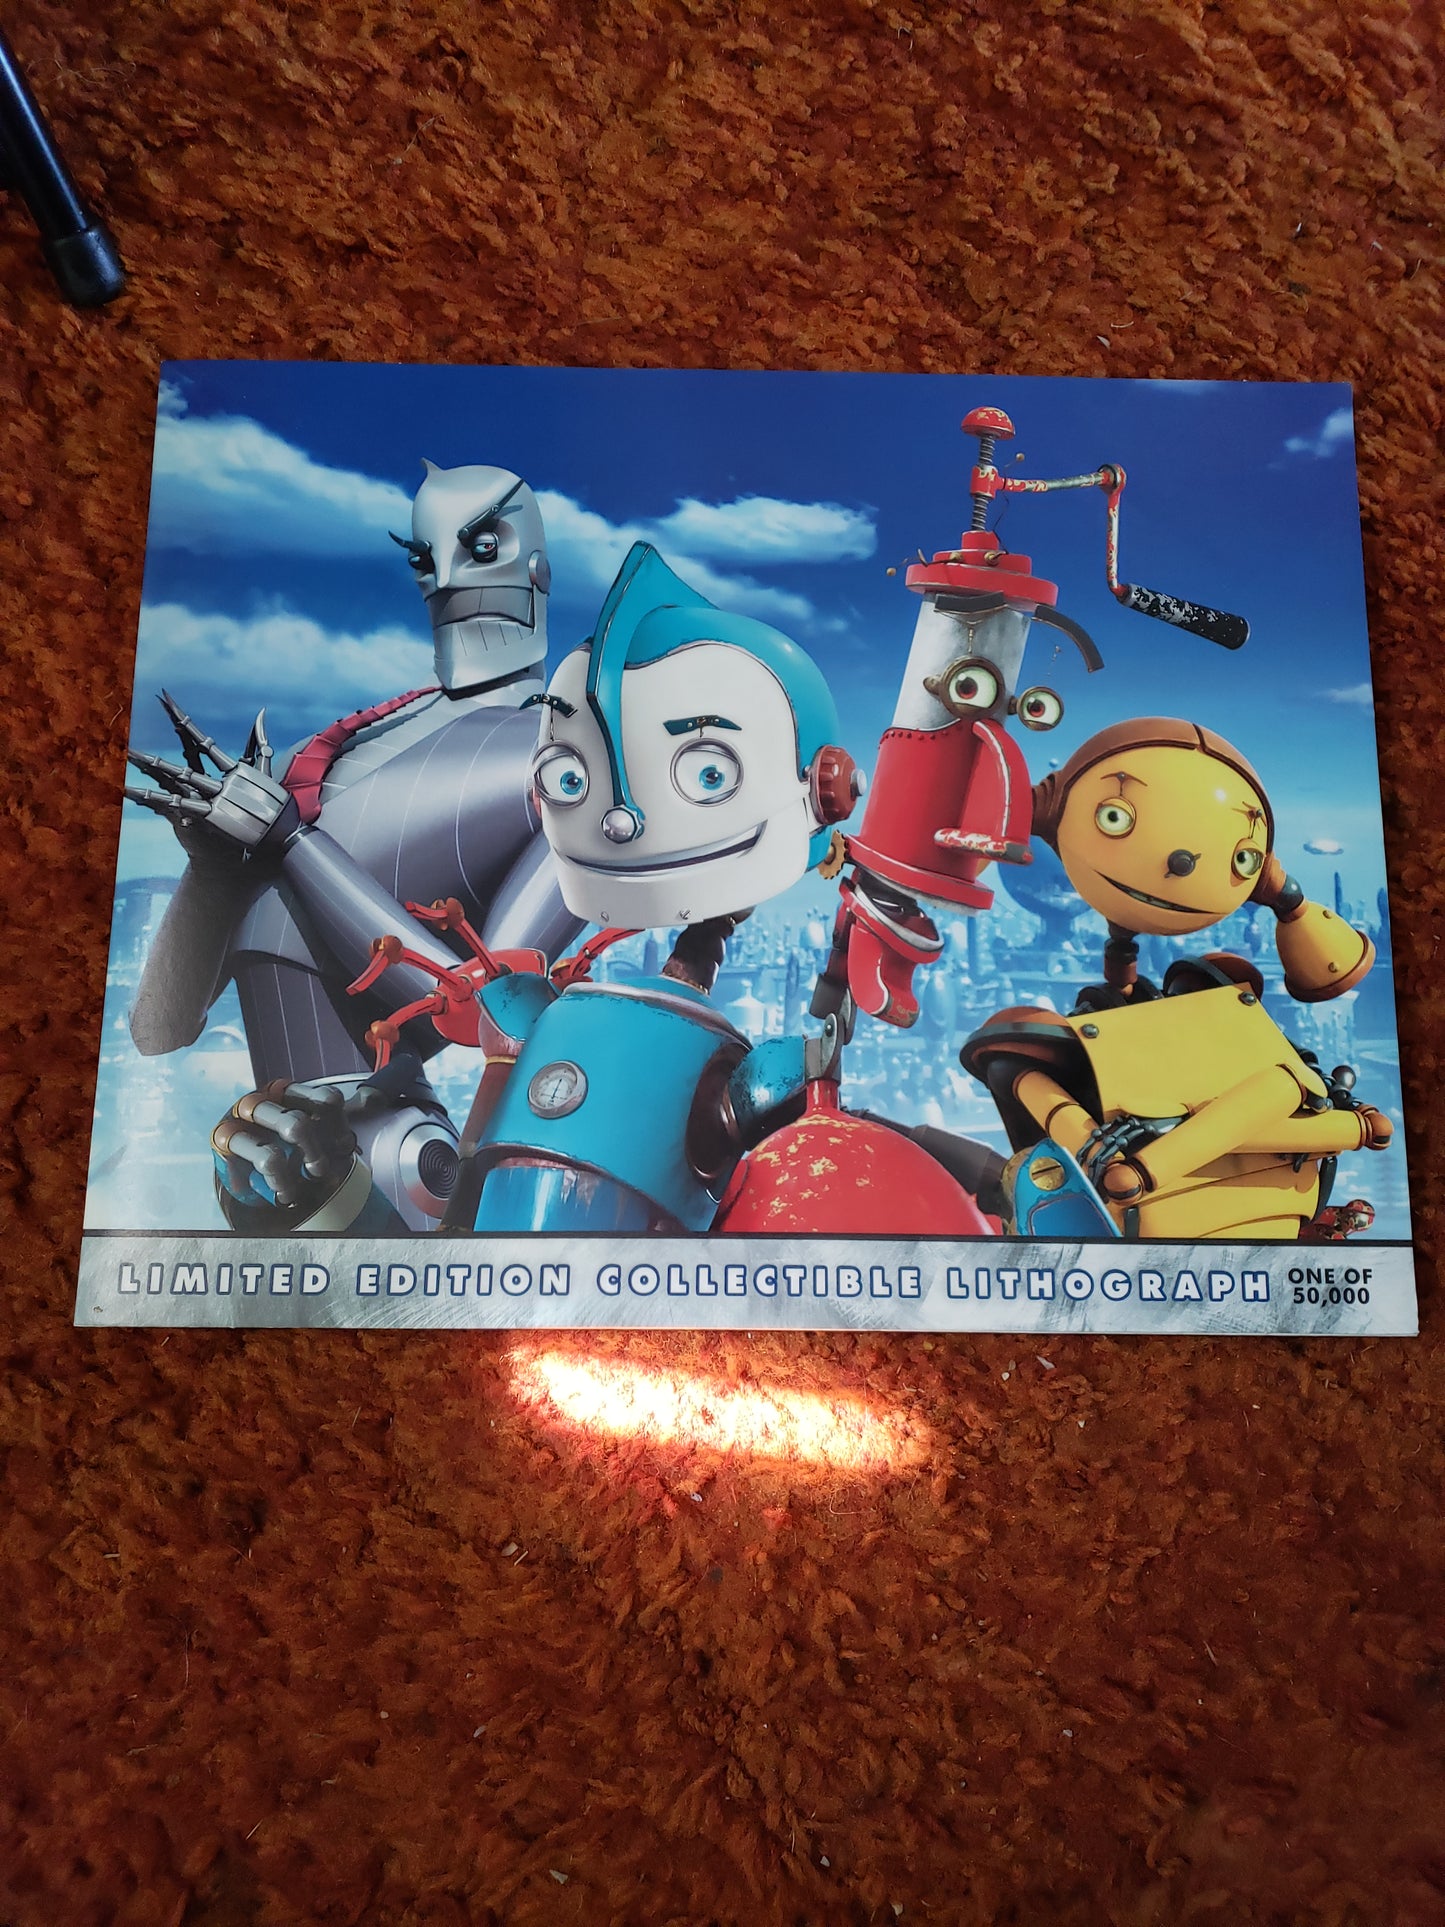 Limited Edition Disney Lithograph "Robots"